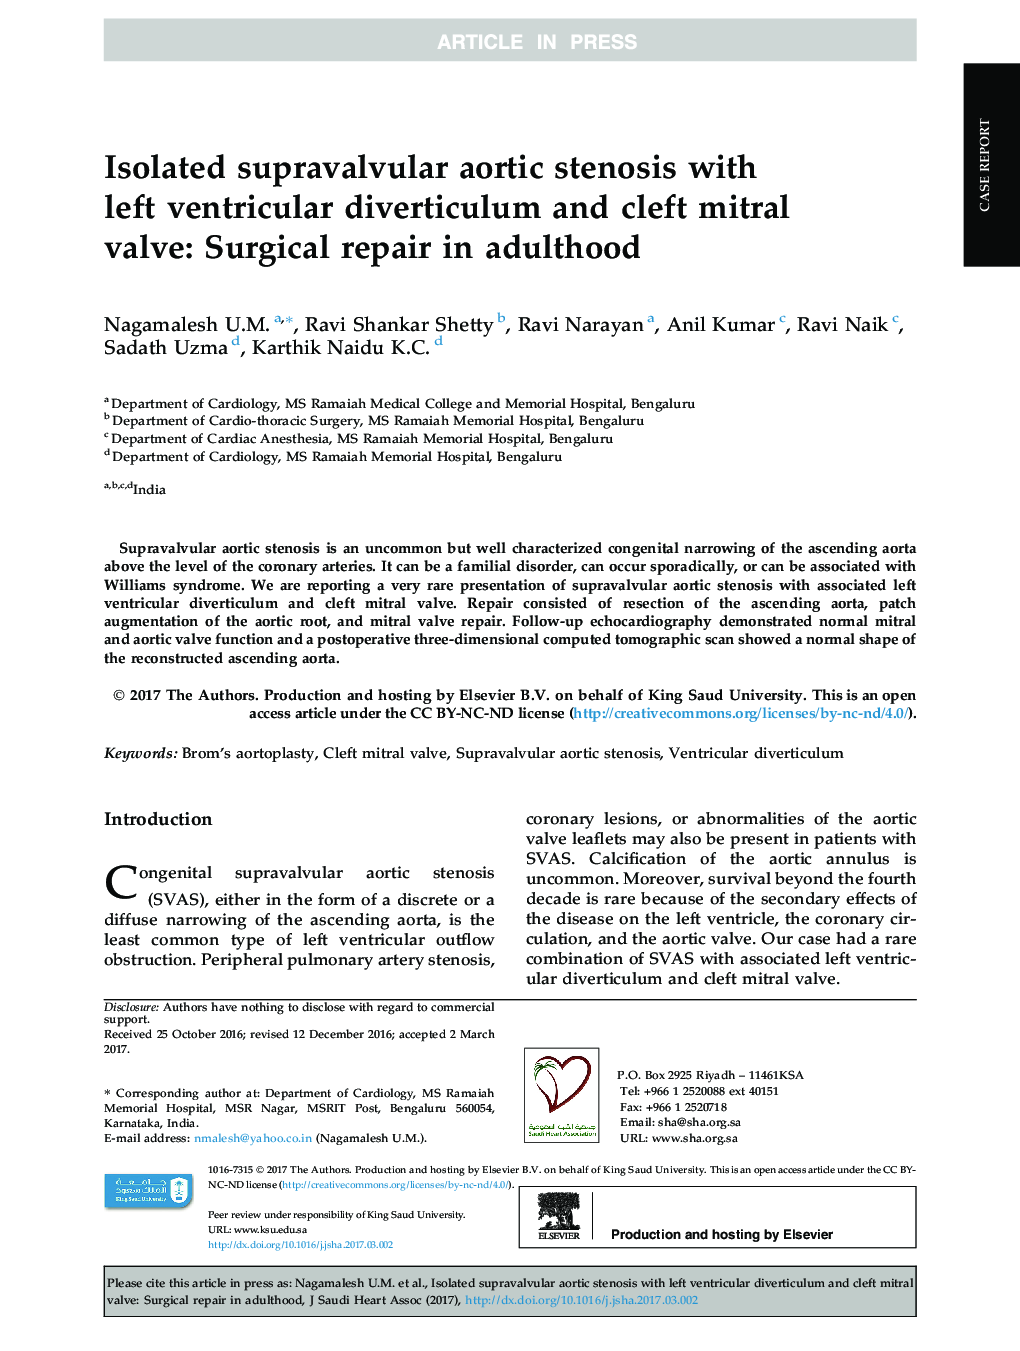 Isolated supravalvular aortic stenosis with left ventricular diverticulum and cleft mitral valve: Surgical repair in adulthood